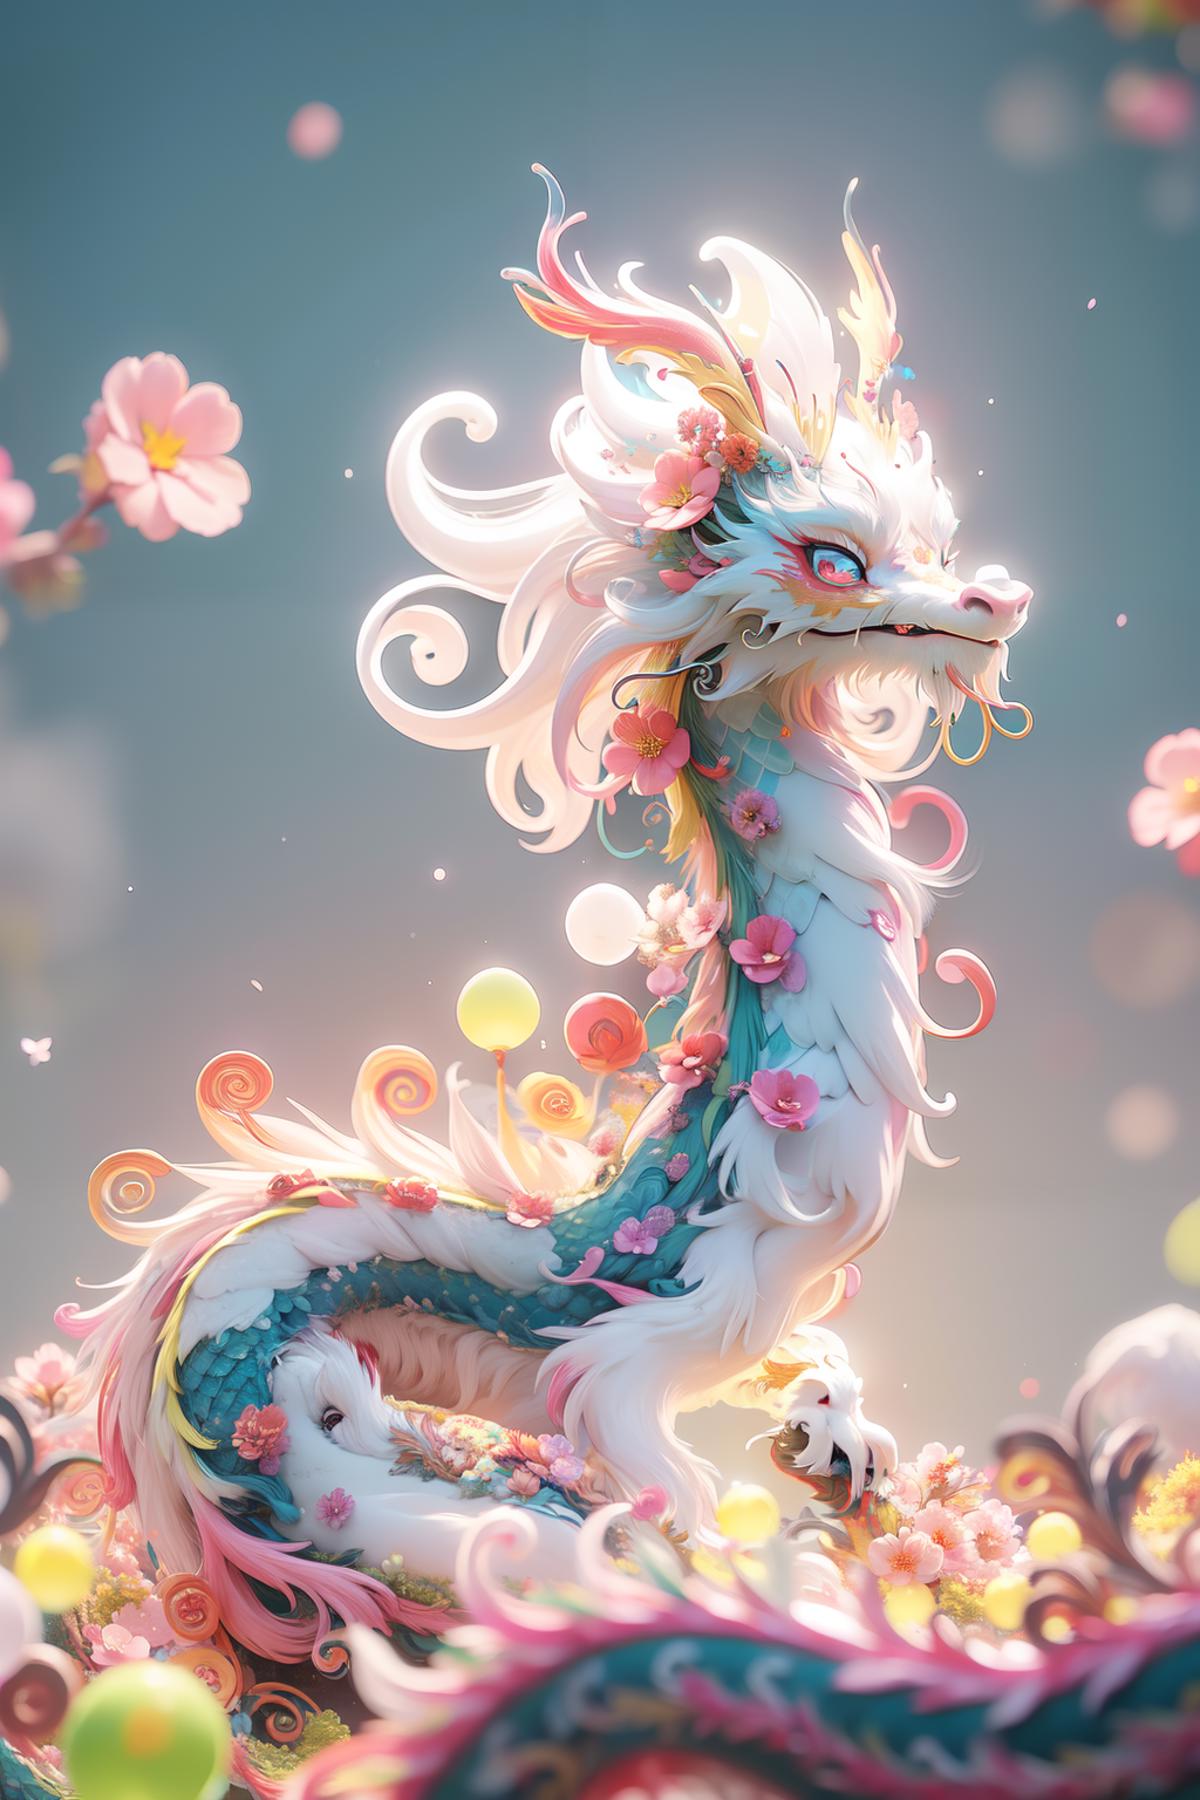 A white dragon with blue eyes and a pink flower for a mouth is standing on a field of flowers.